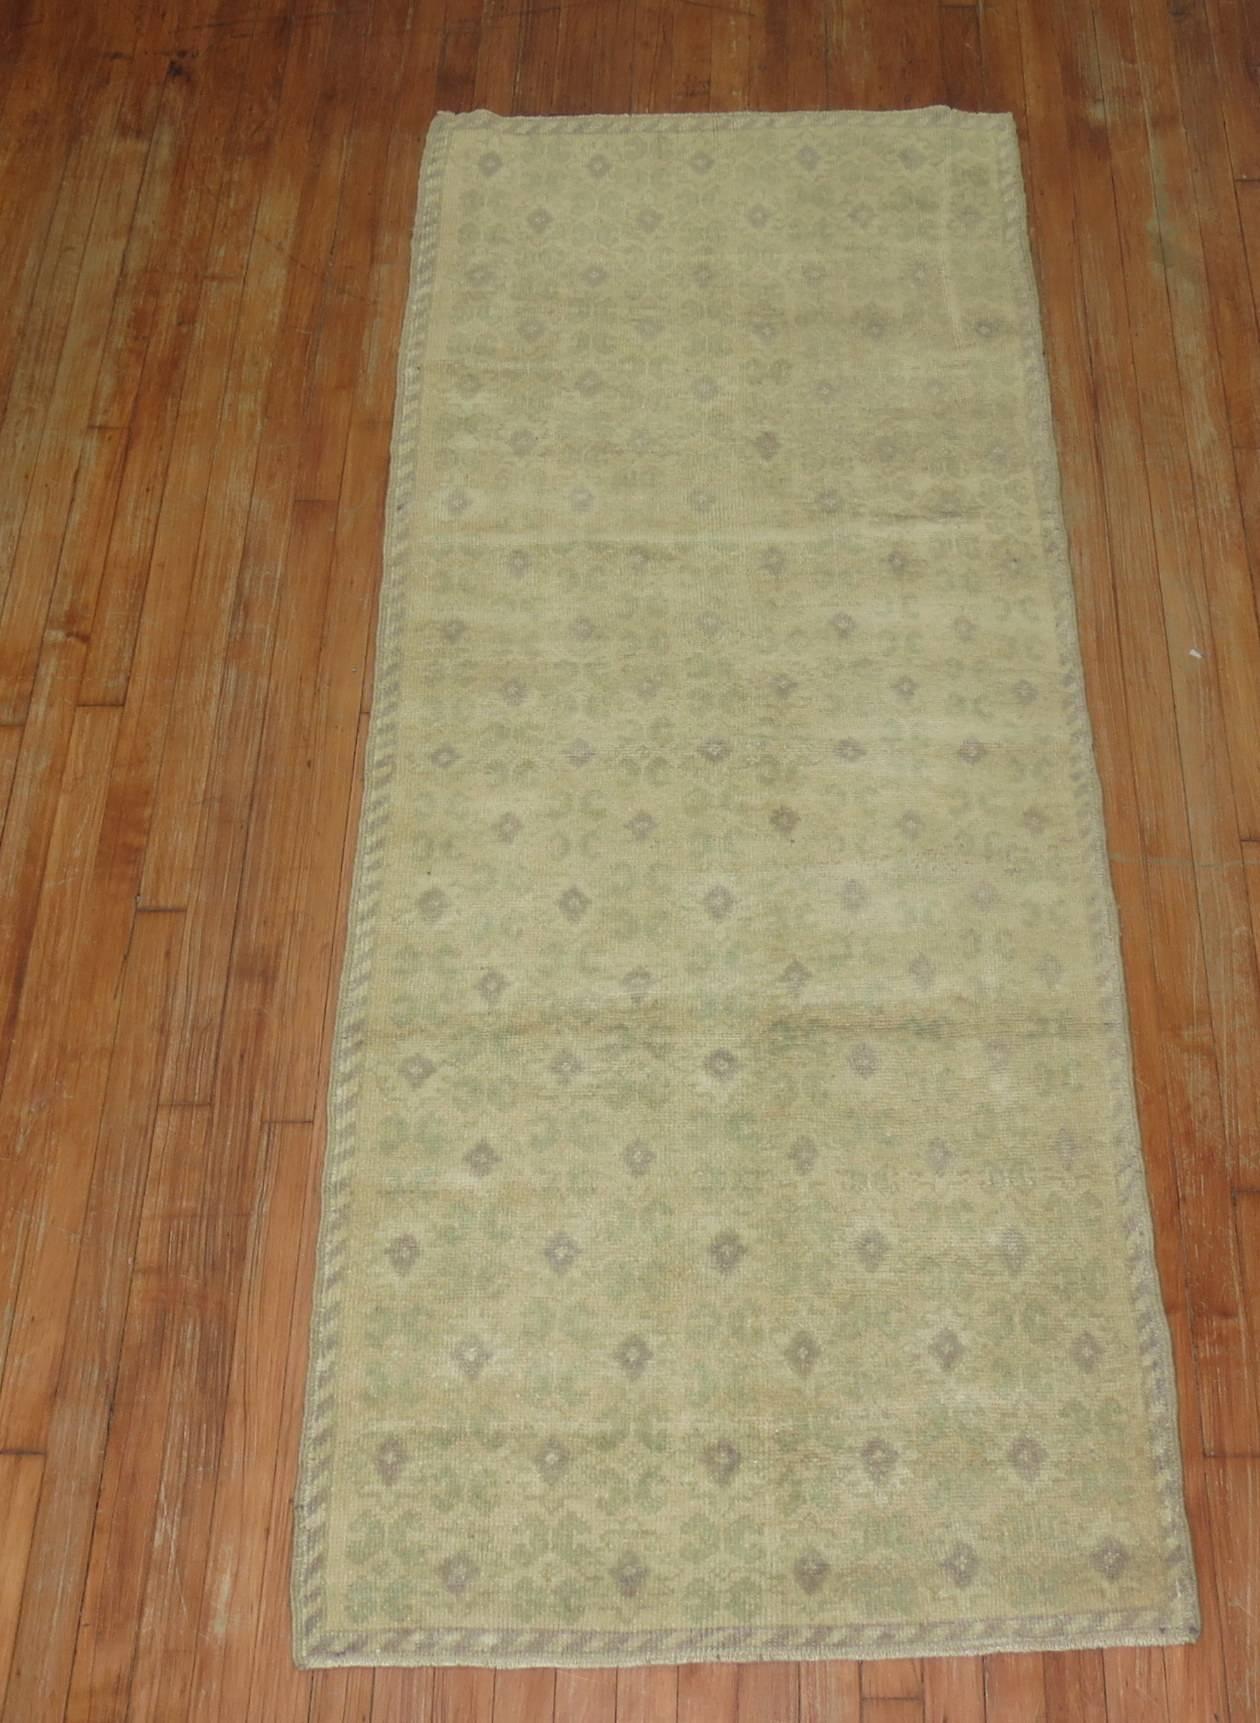 Vintage Turkish runner with an all-over floral design with gray and soft green accents on a beige ground,

circa mid-20th century, measures: 2'11